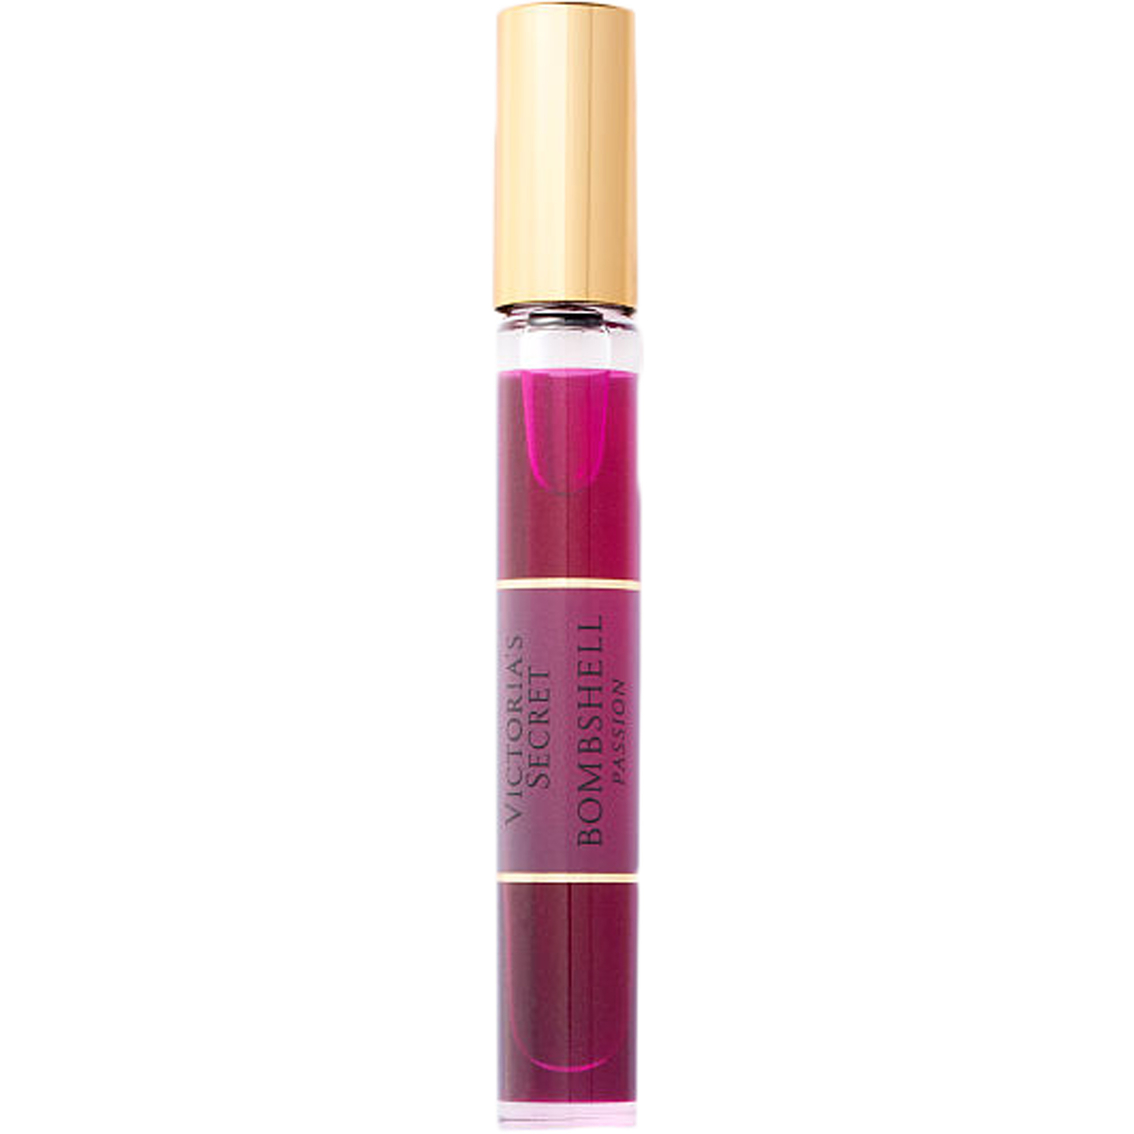 Victoria's Secret Bombshell Passion Rollerball - Image 2 of 2